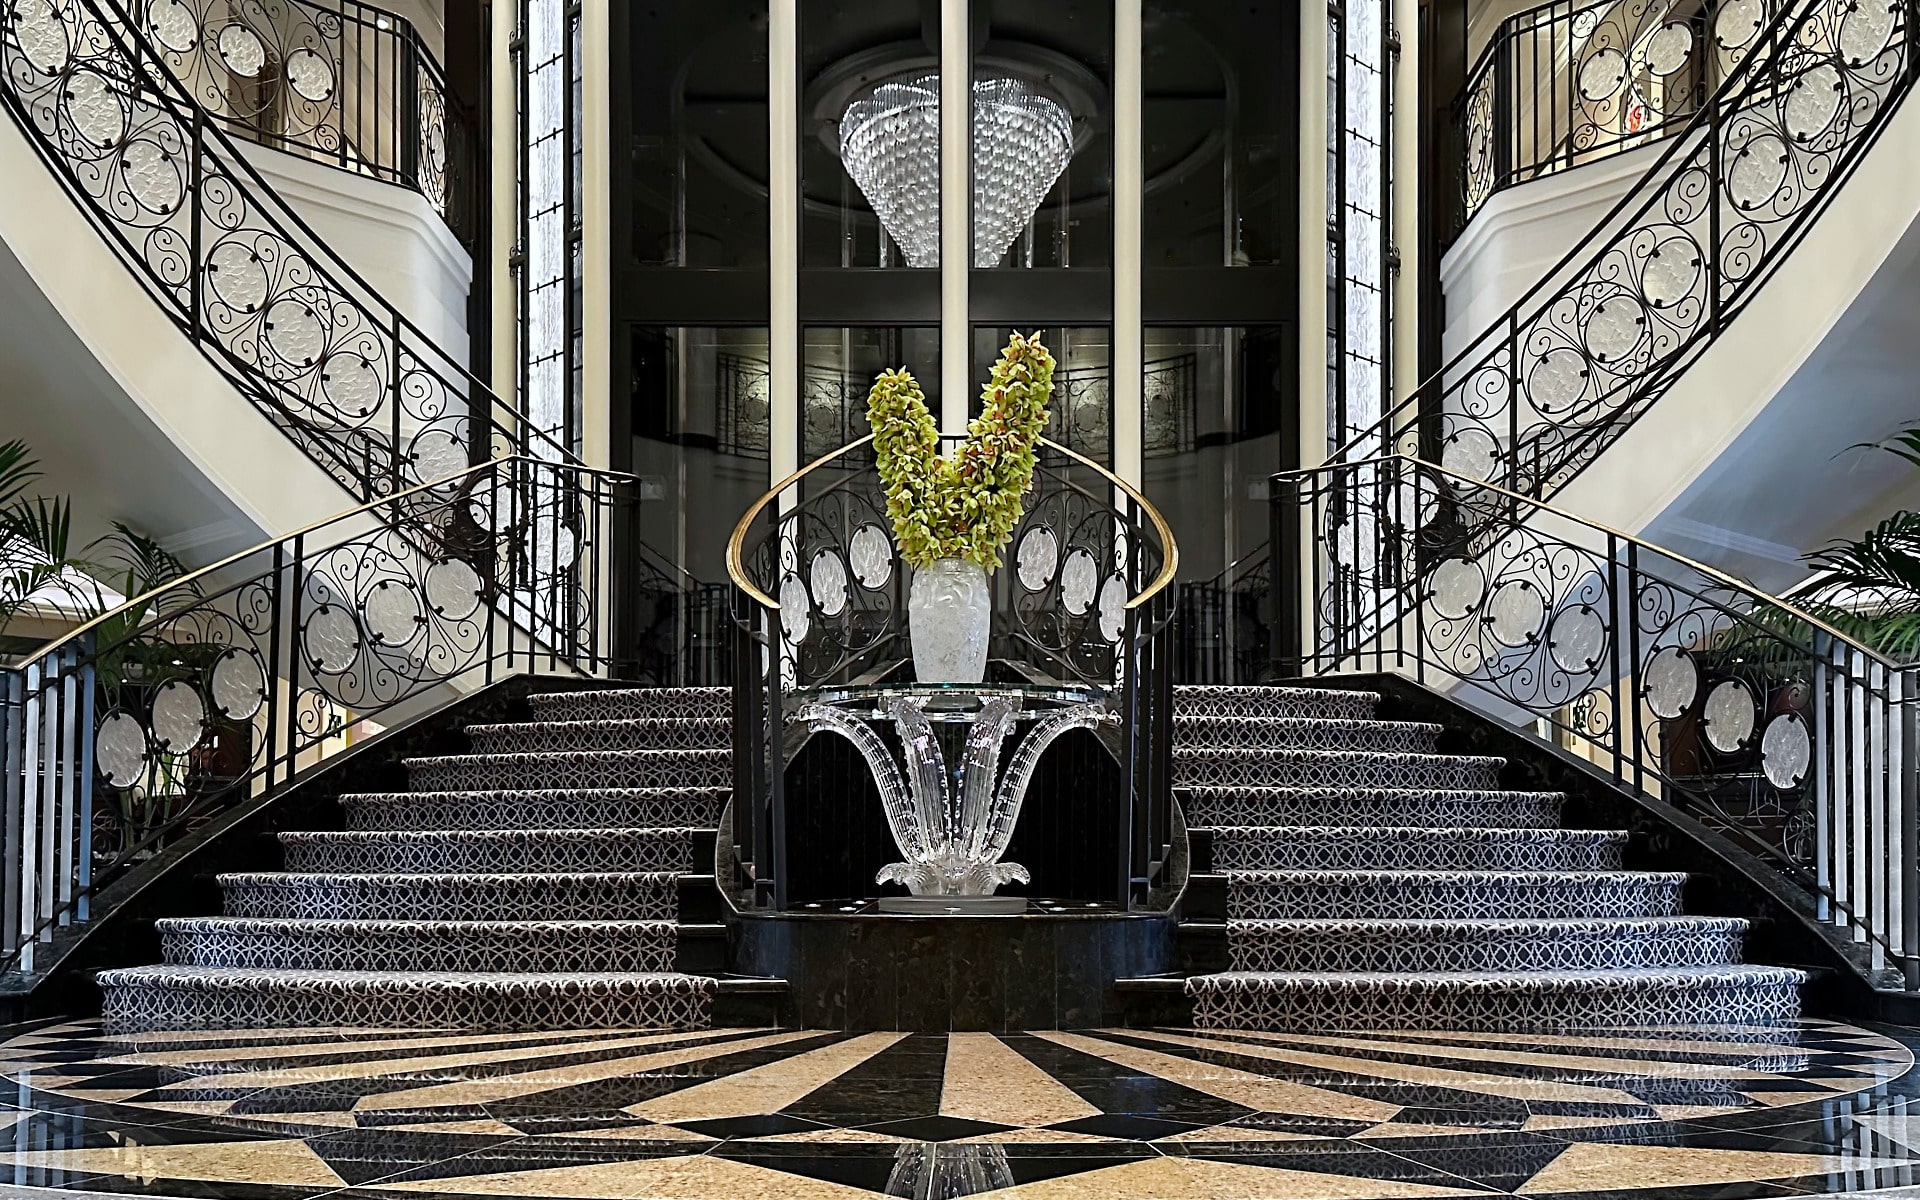 The Grand Staircase on Oceania's Riviera cruise ship.